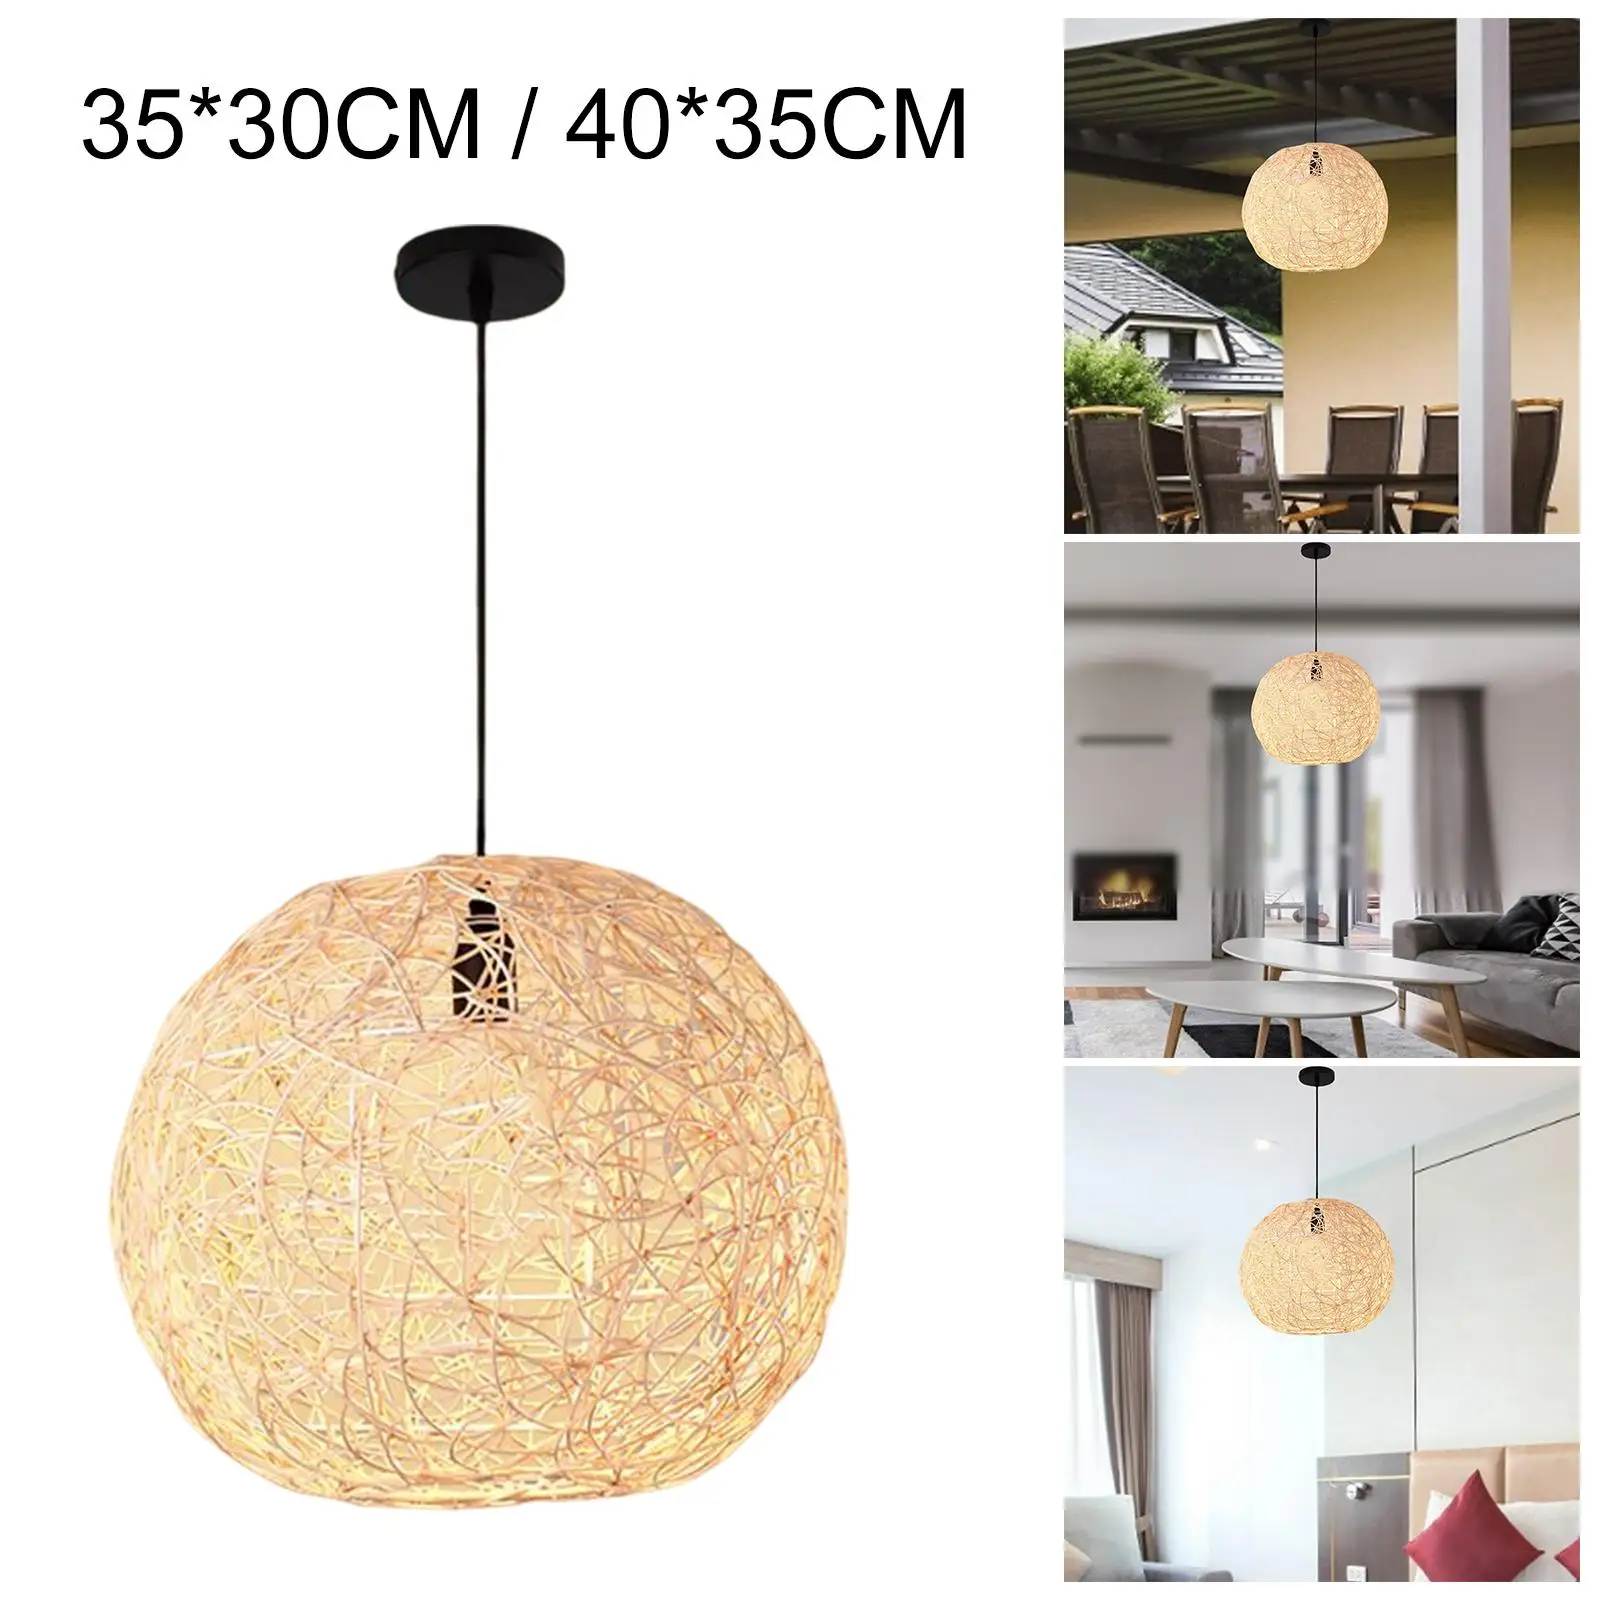 Bamboo Woven Light Shade Pendant Light Ceiling Lampshade Cage Guard Cafe